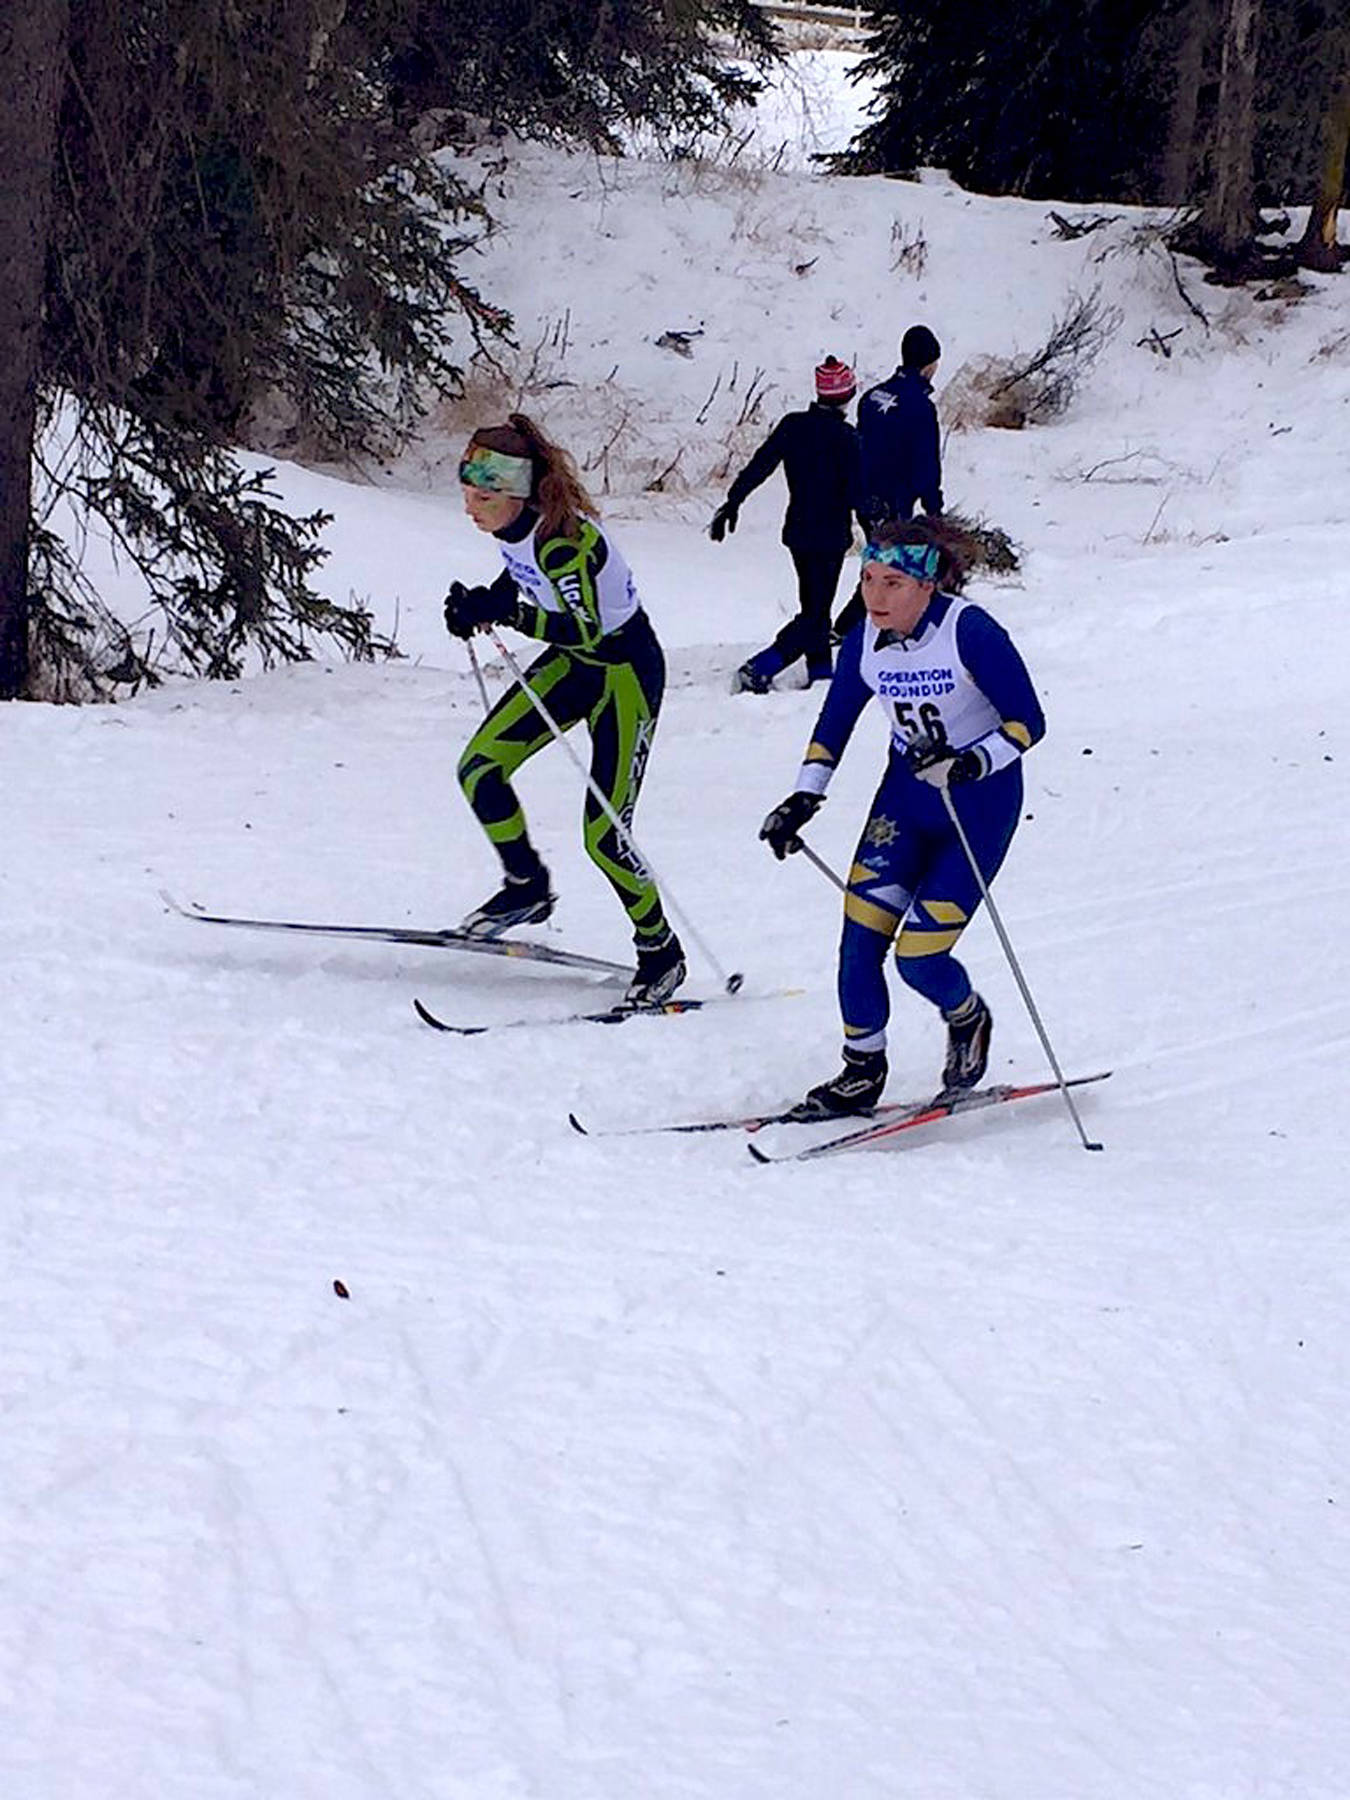 Homer’s Katia Holmes vies for 5th place with Colony racer Sofija Spaic during a two-day race event Jan. 12-13, 2018 at Government Peak in Hatcher Pass, Alaska. (Photo by Libby Fabich)